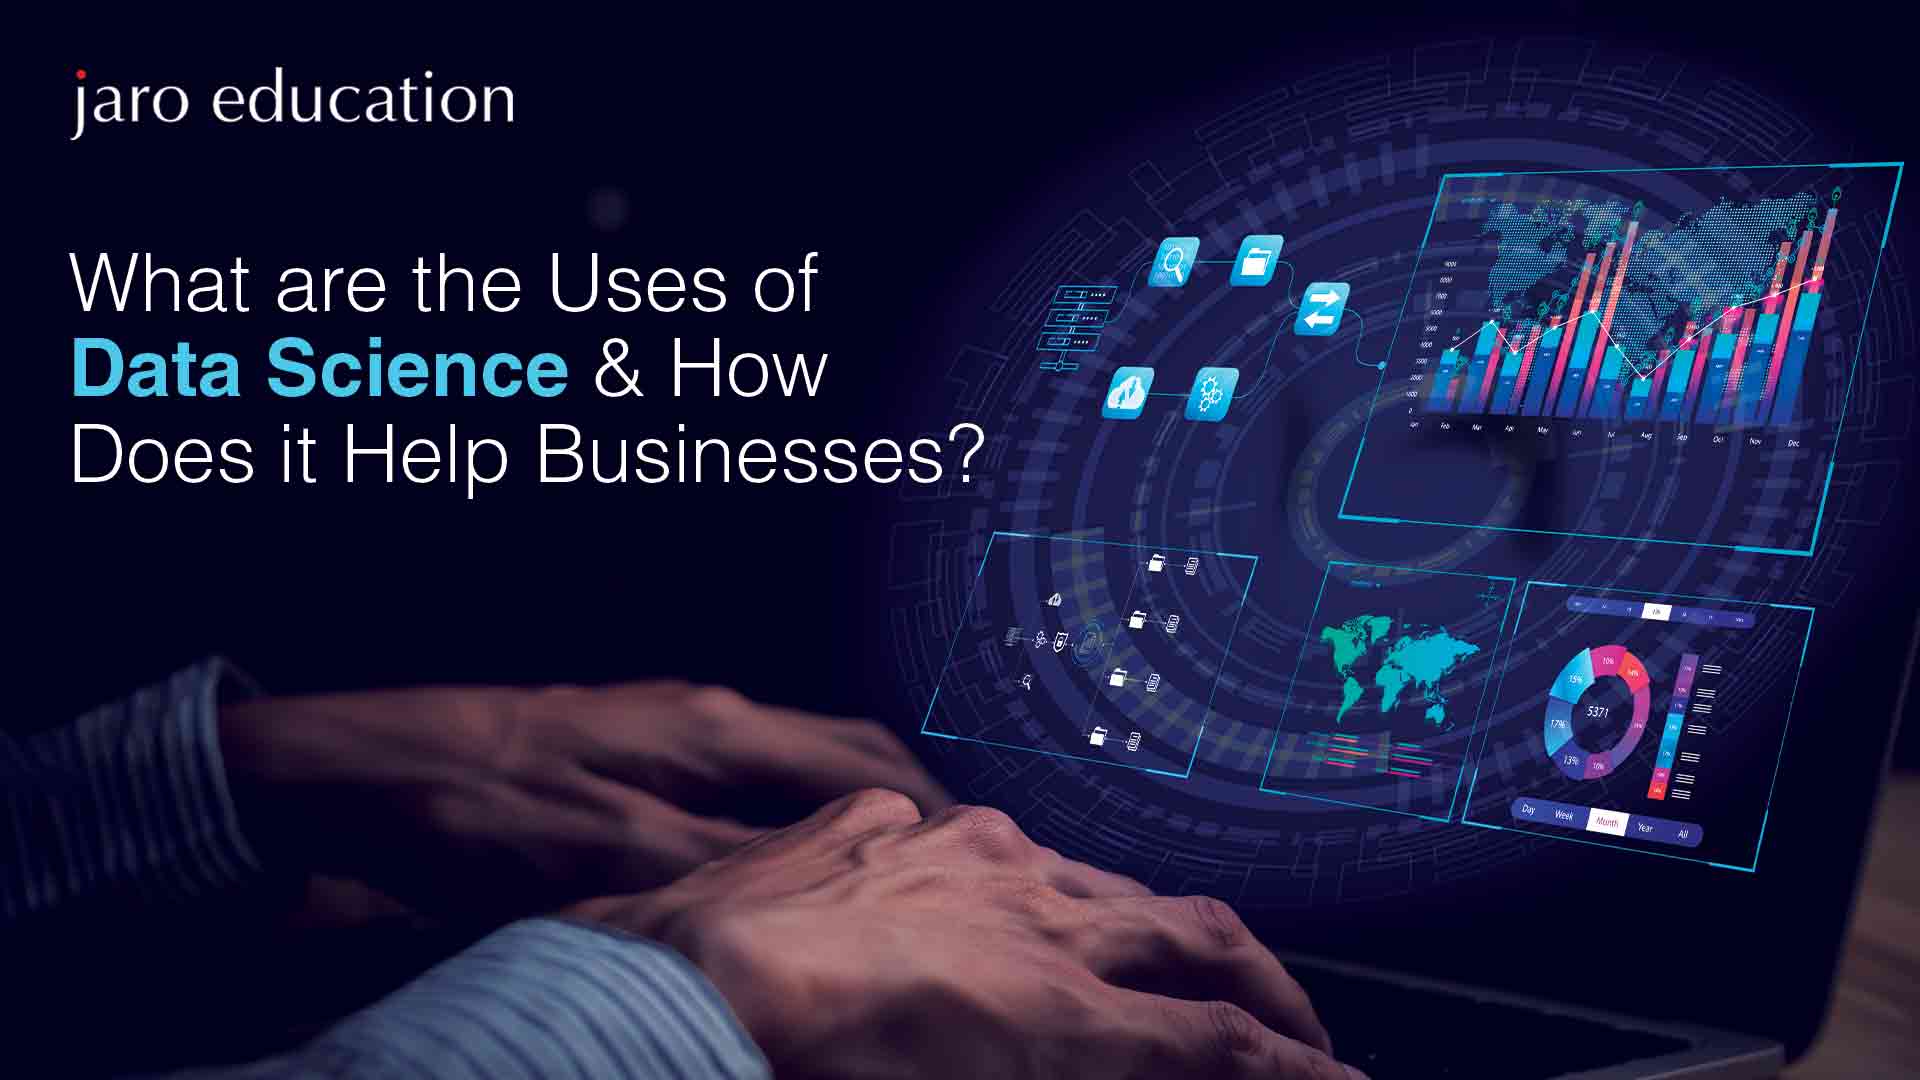 What are the Uses of Data Science & How Does it Help Businesses